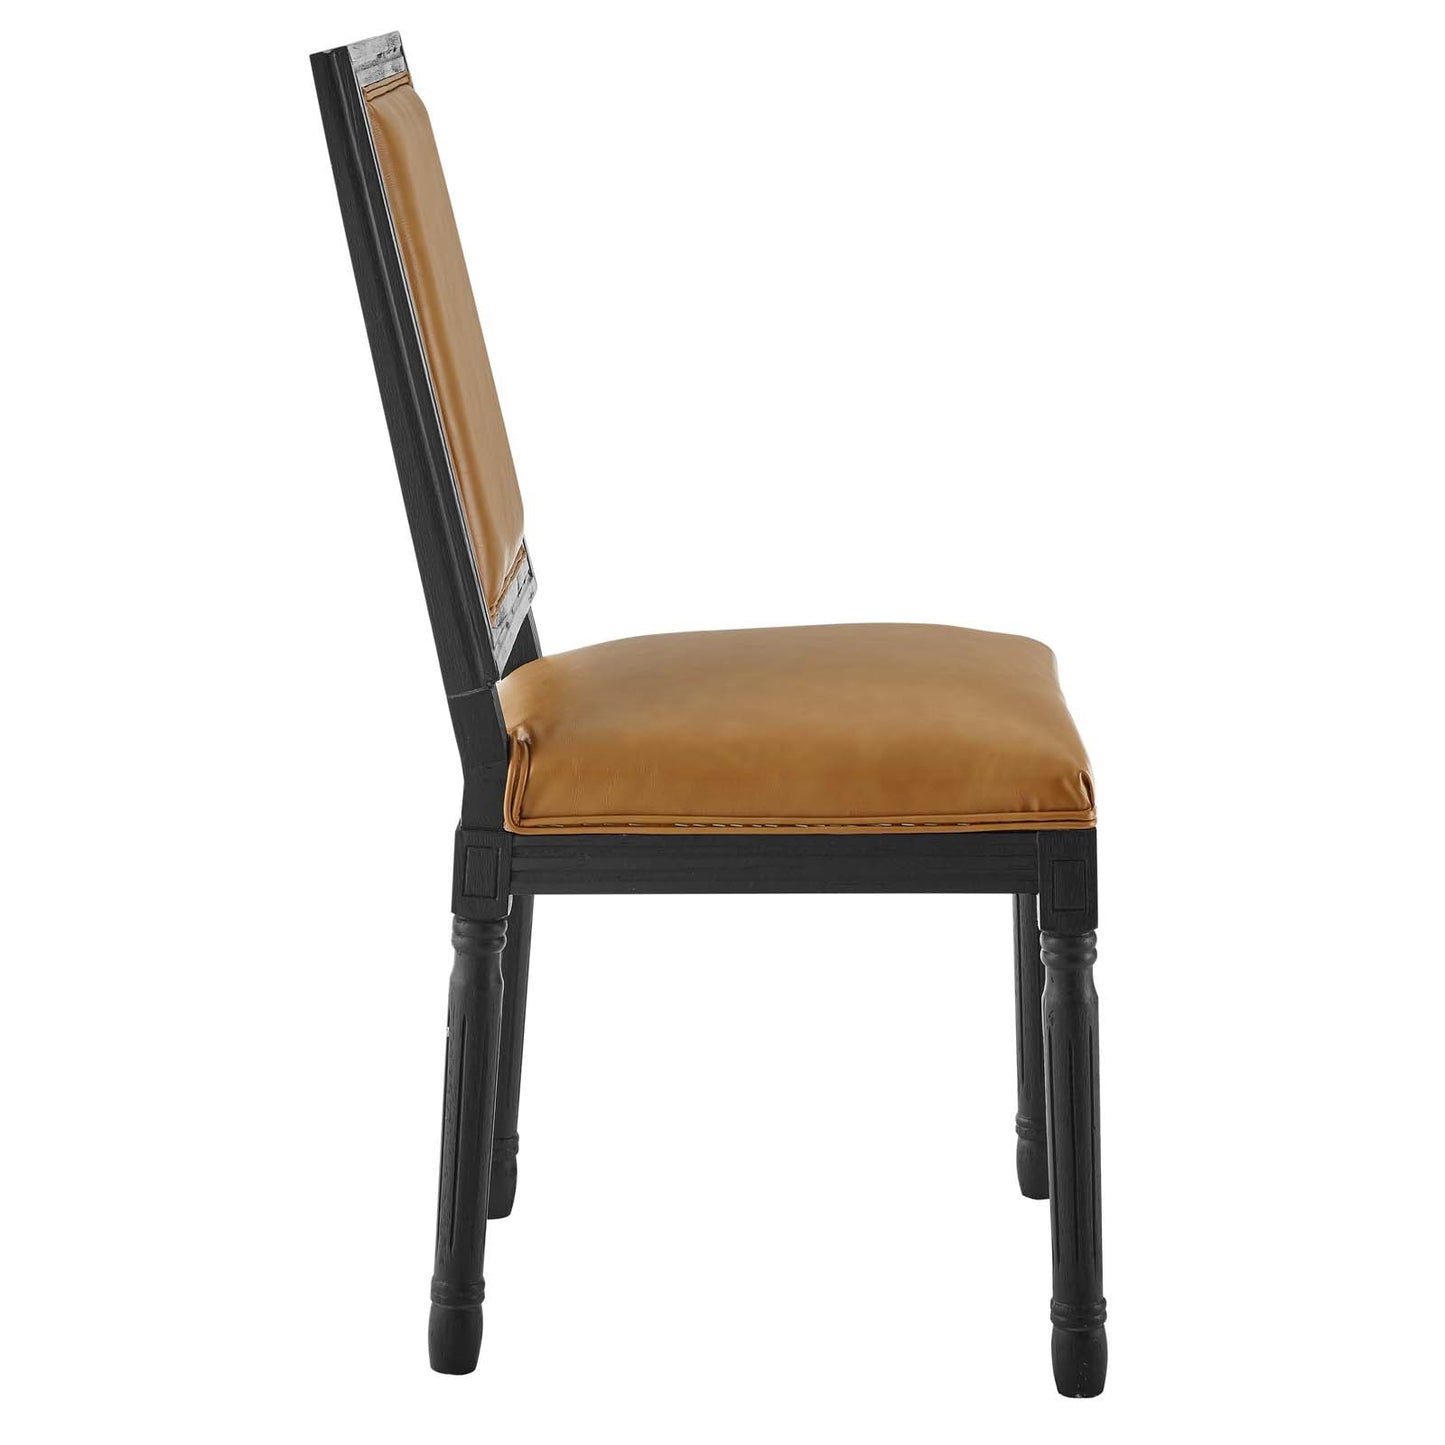 Carter French Vintage Vegan Leather Side Dining Chair in Black/Tan